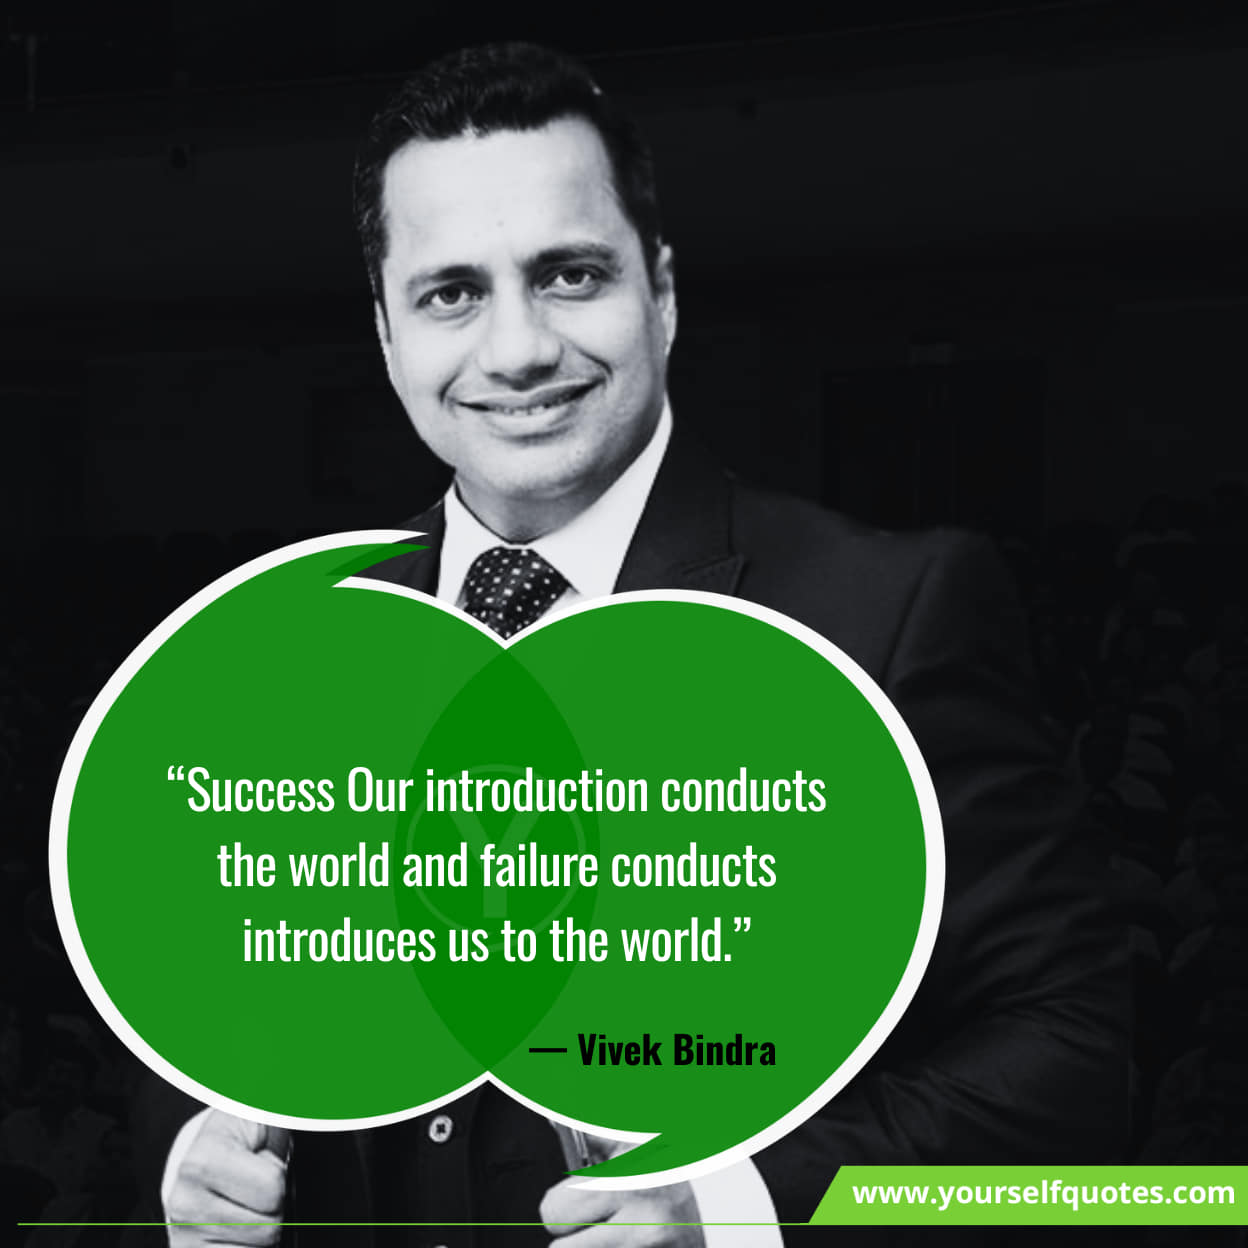 Best Vivek Bindra Quotes On Success